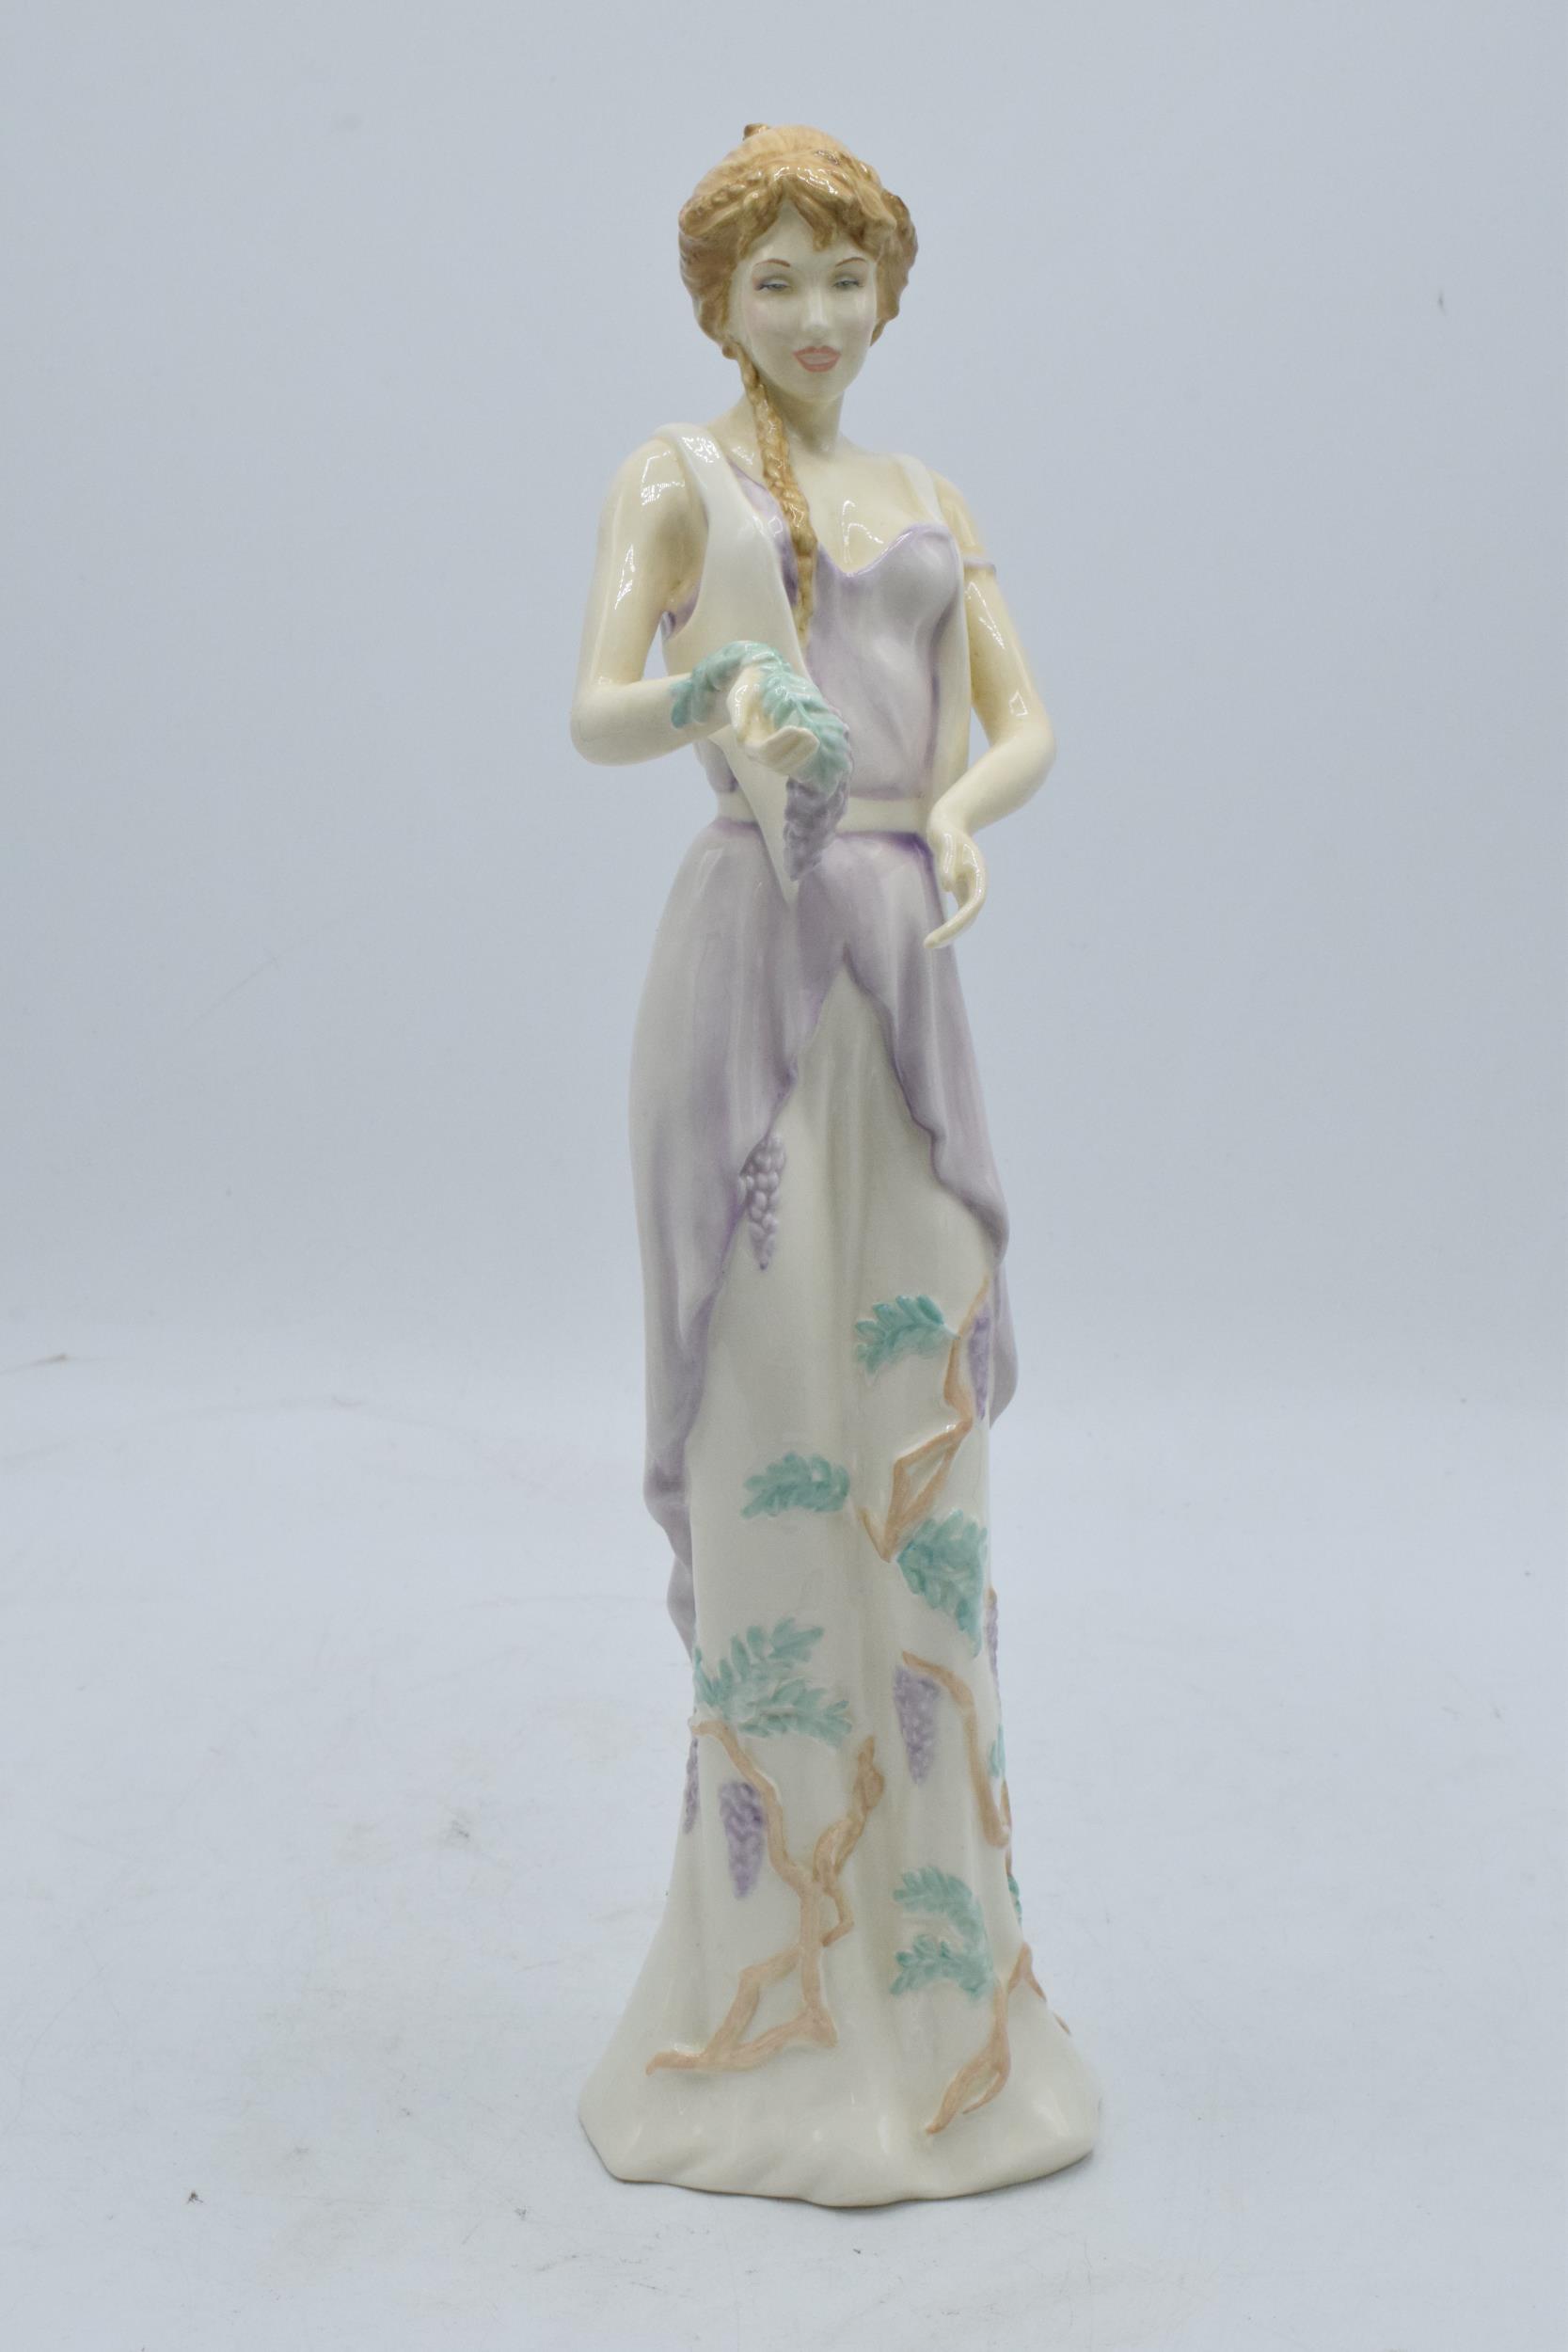 Royal Doulton Impressions figure Summer Blooms HN4194. In good condition with no obvious damage or